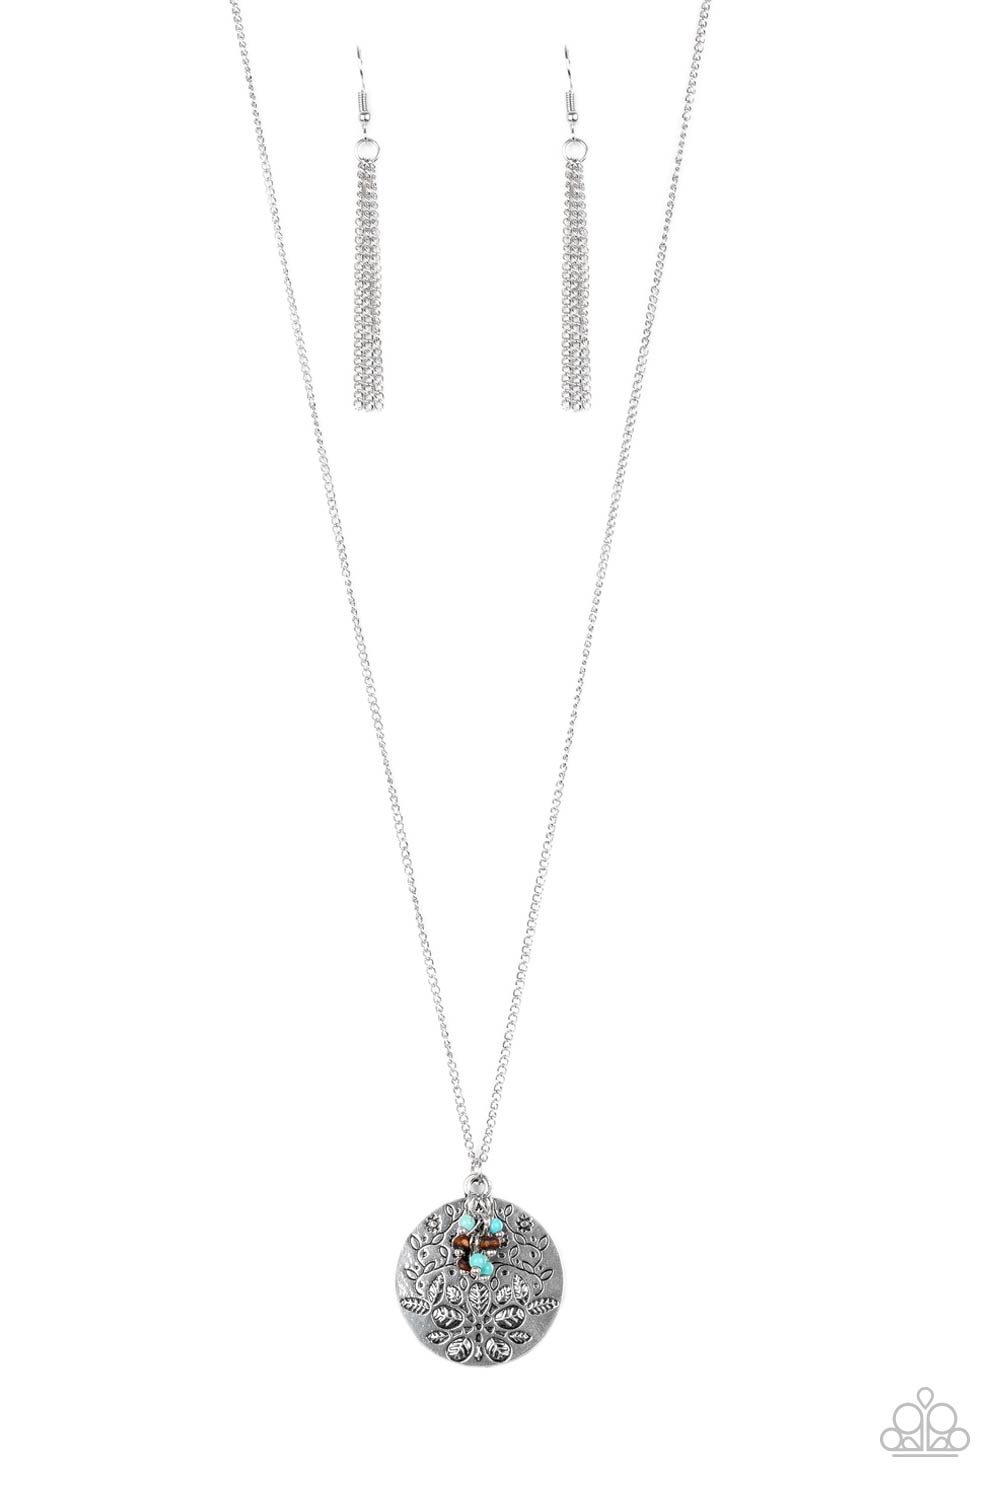 Desert Abundance Paparazzi Accessories Necklace with Earrings Blue